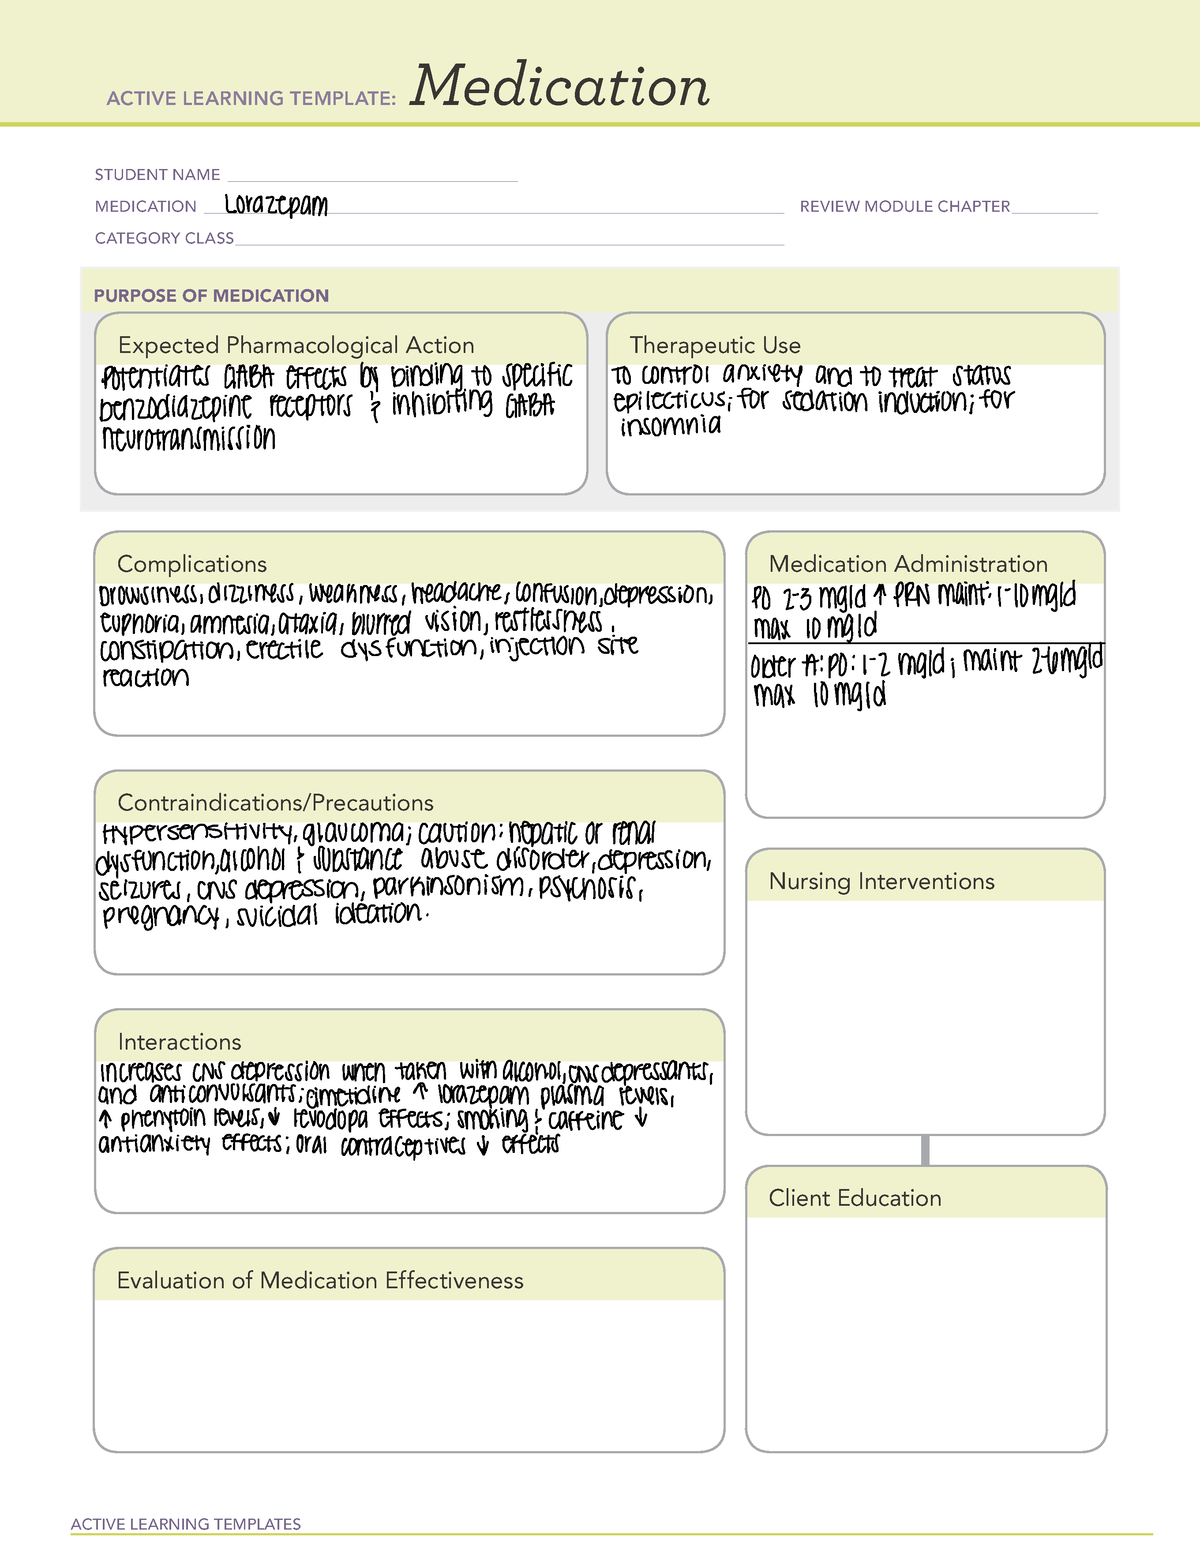 active-learning-template-lorazepam-active-learning-templates-medication-student-name-studocu